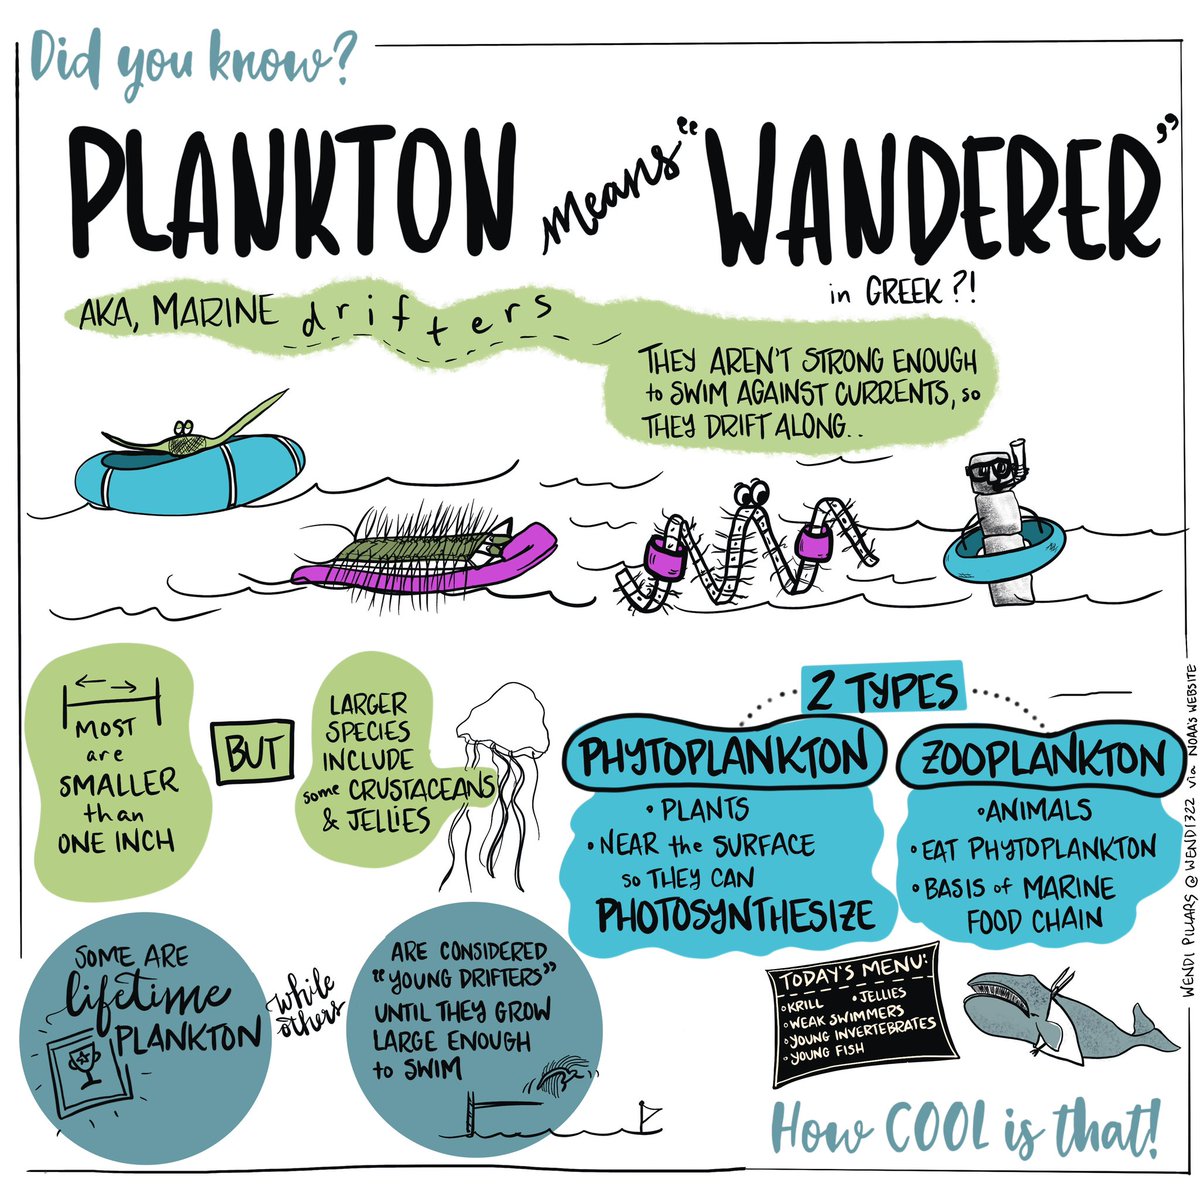 Did you know that Plankton means “wanderer” in Greek? I had fun imagining them drifting along 😍#howcoolisthat #didyouknow #oceans
#scicomm #artisticfreedom